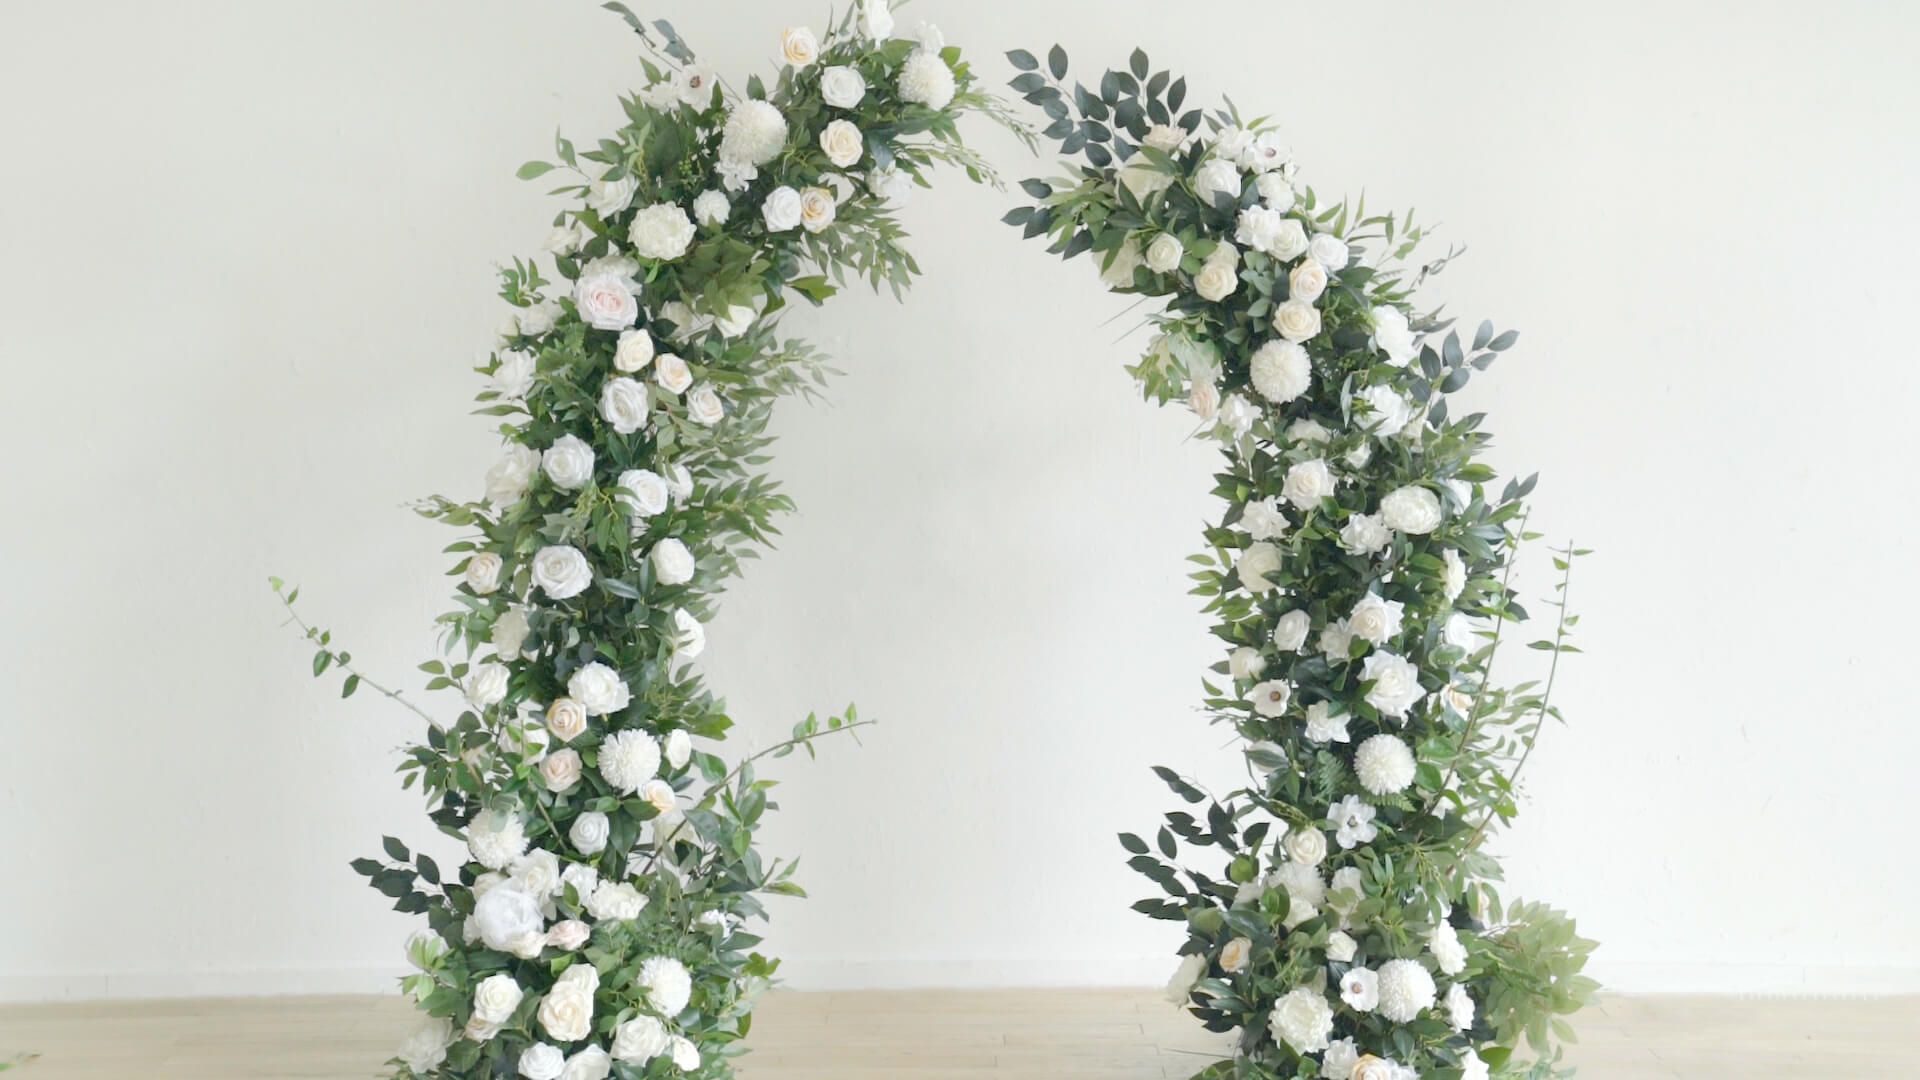 How To Make Archway Floral Arrangements